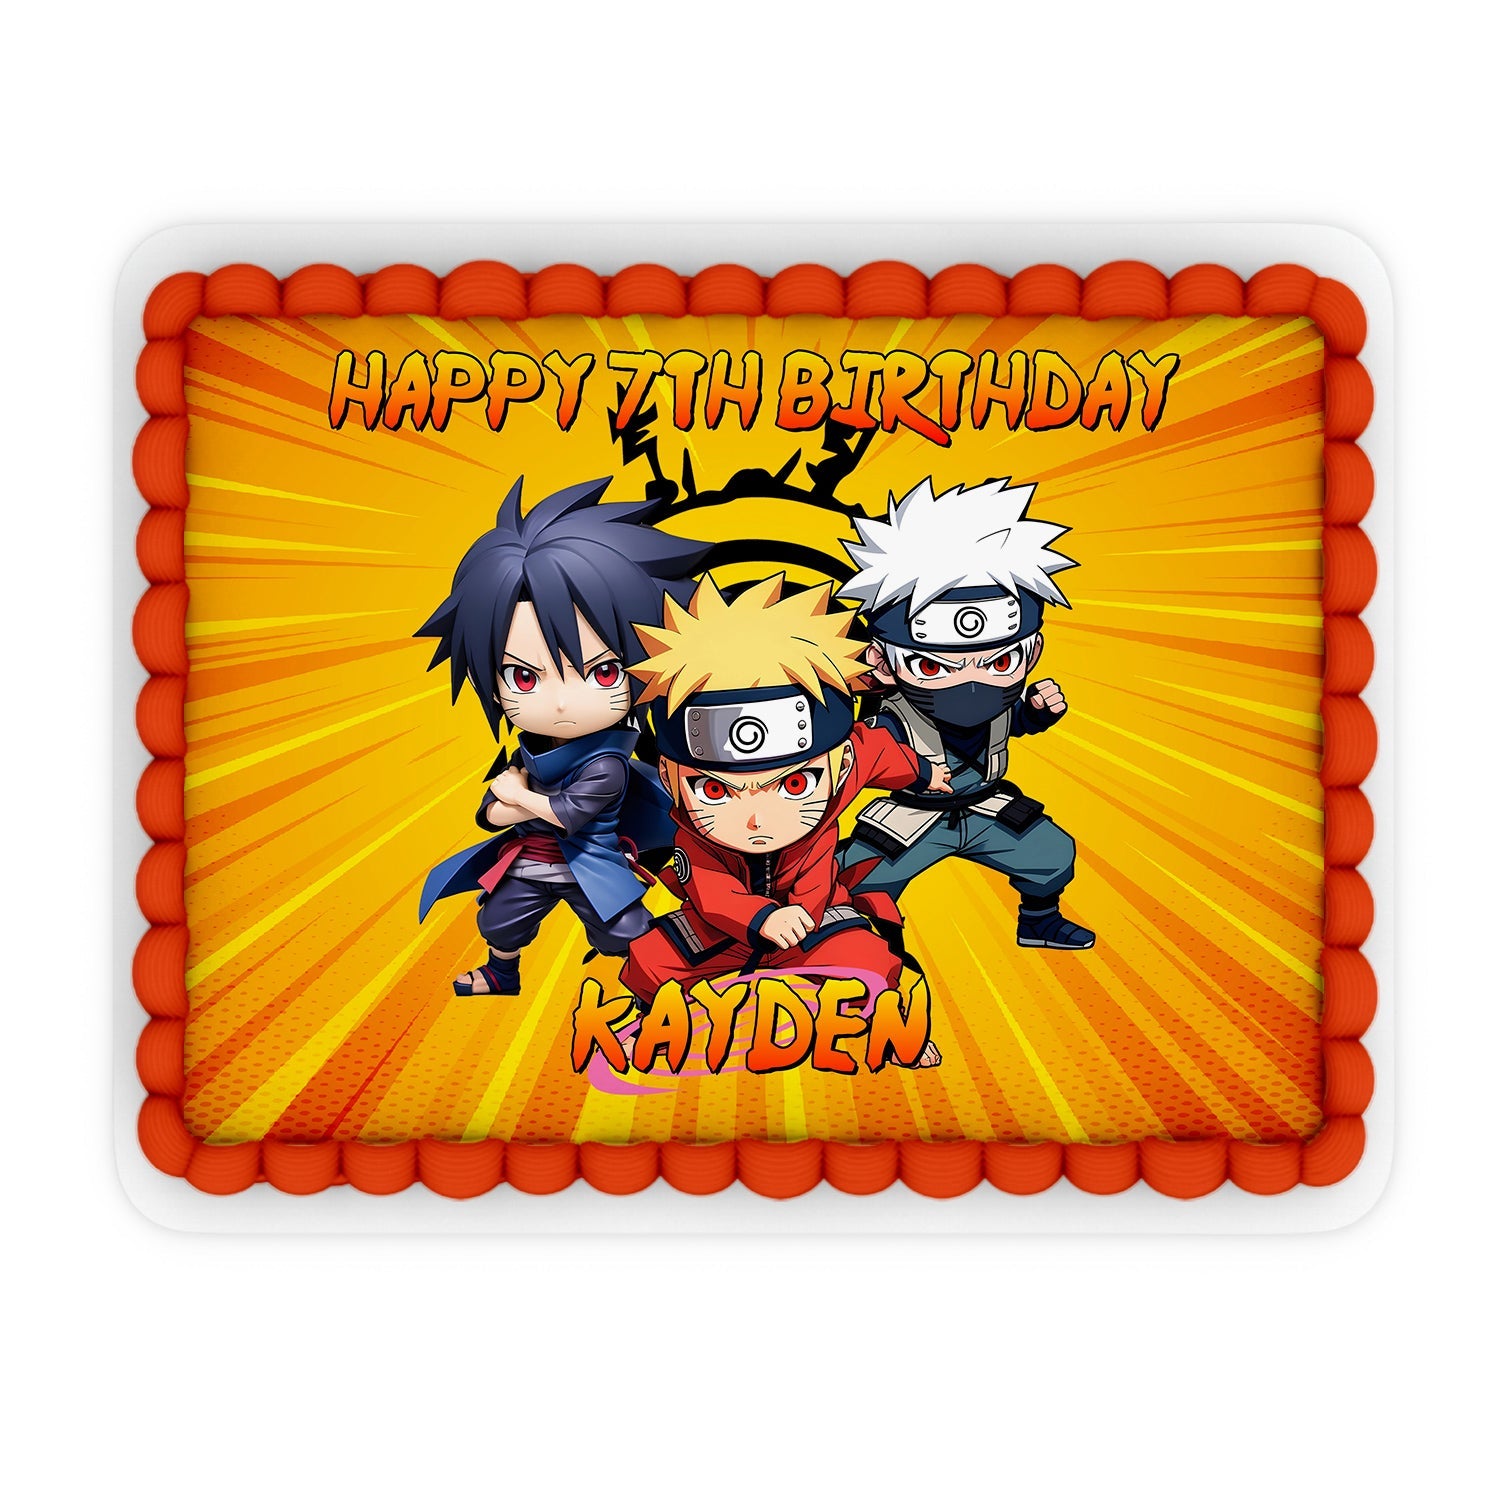 Rectangle Naruto personalized edible sheet cake images